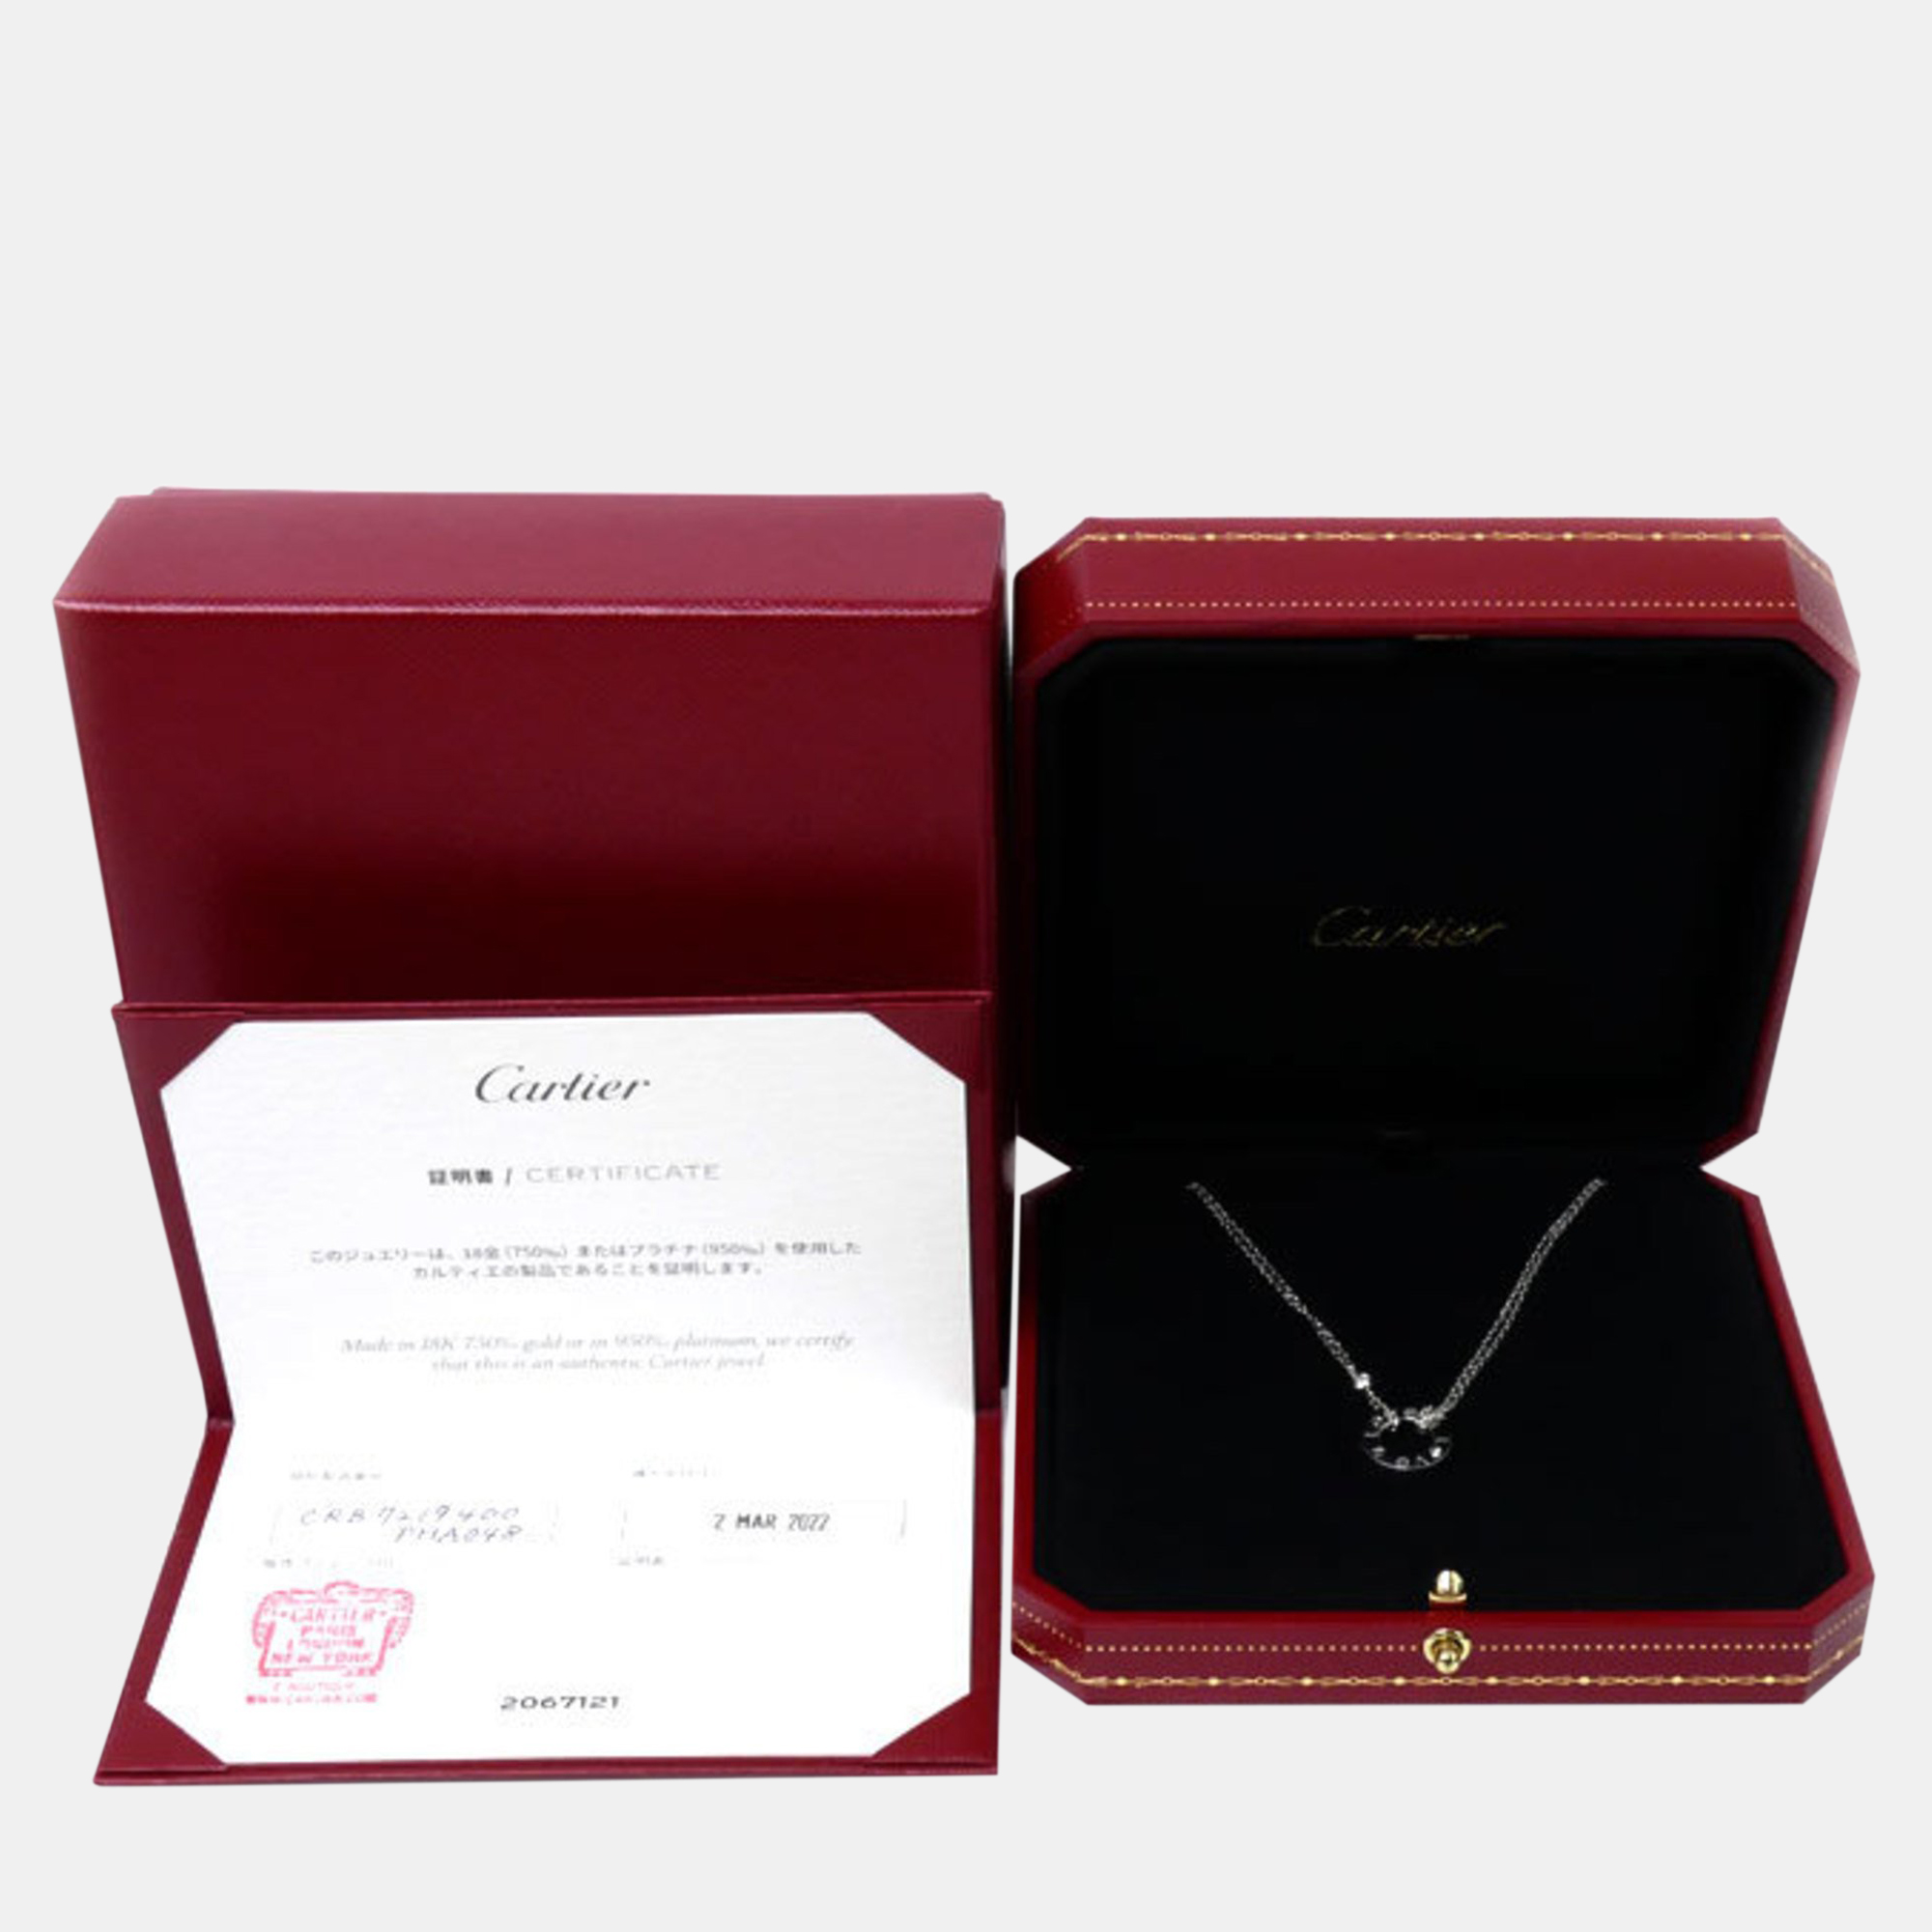 Cartier 18K White Gold And 2 Diamond Love Necklace